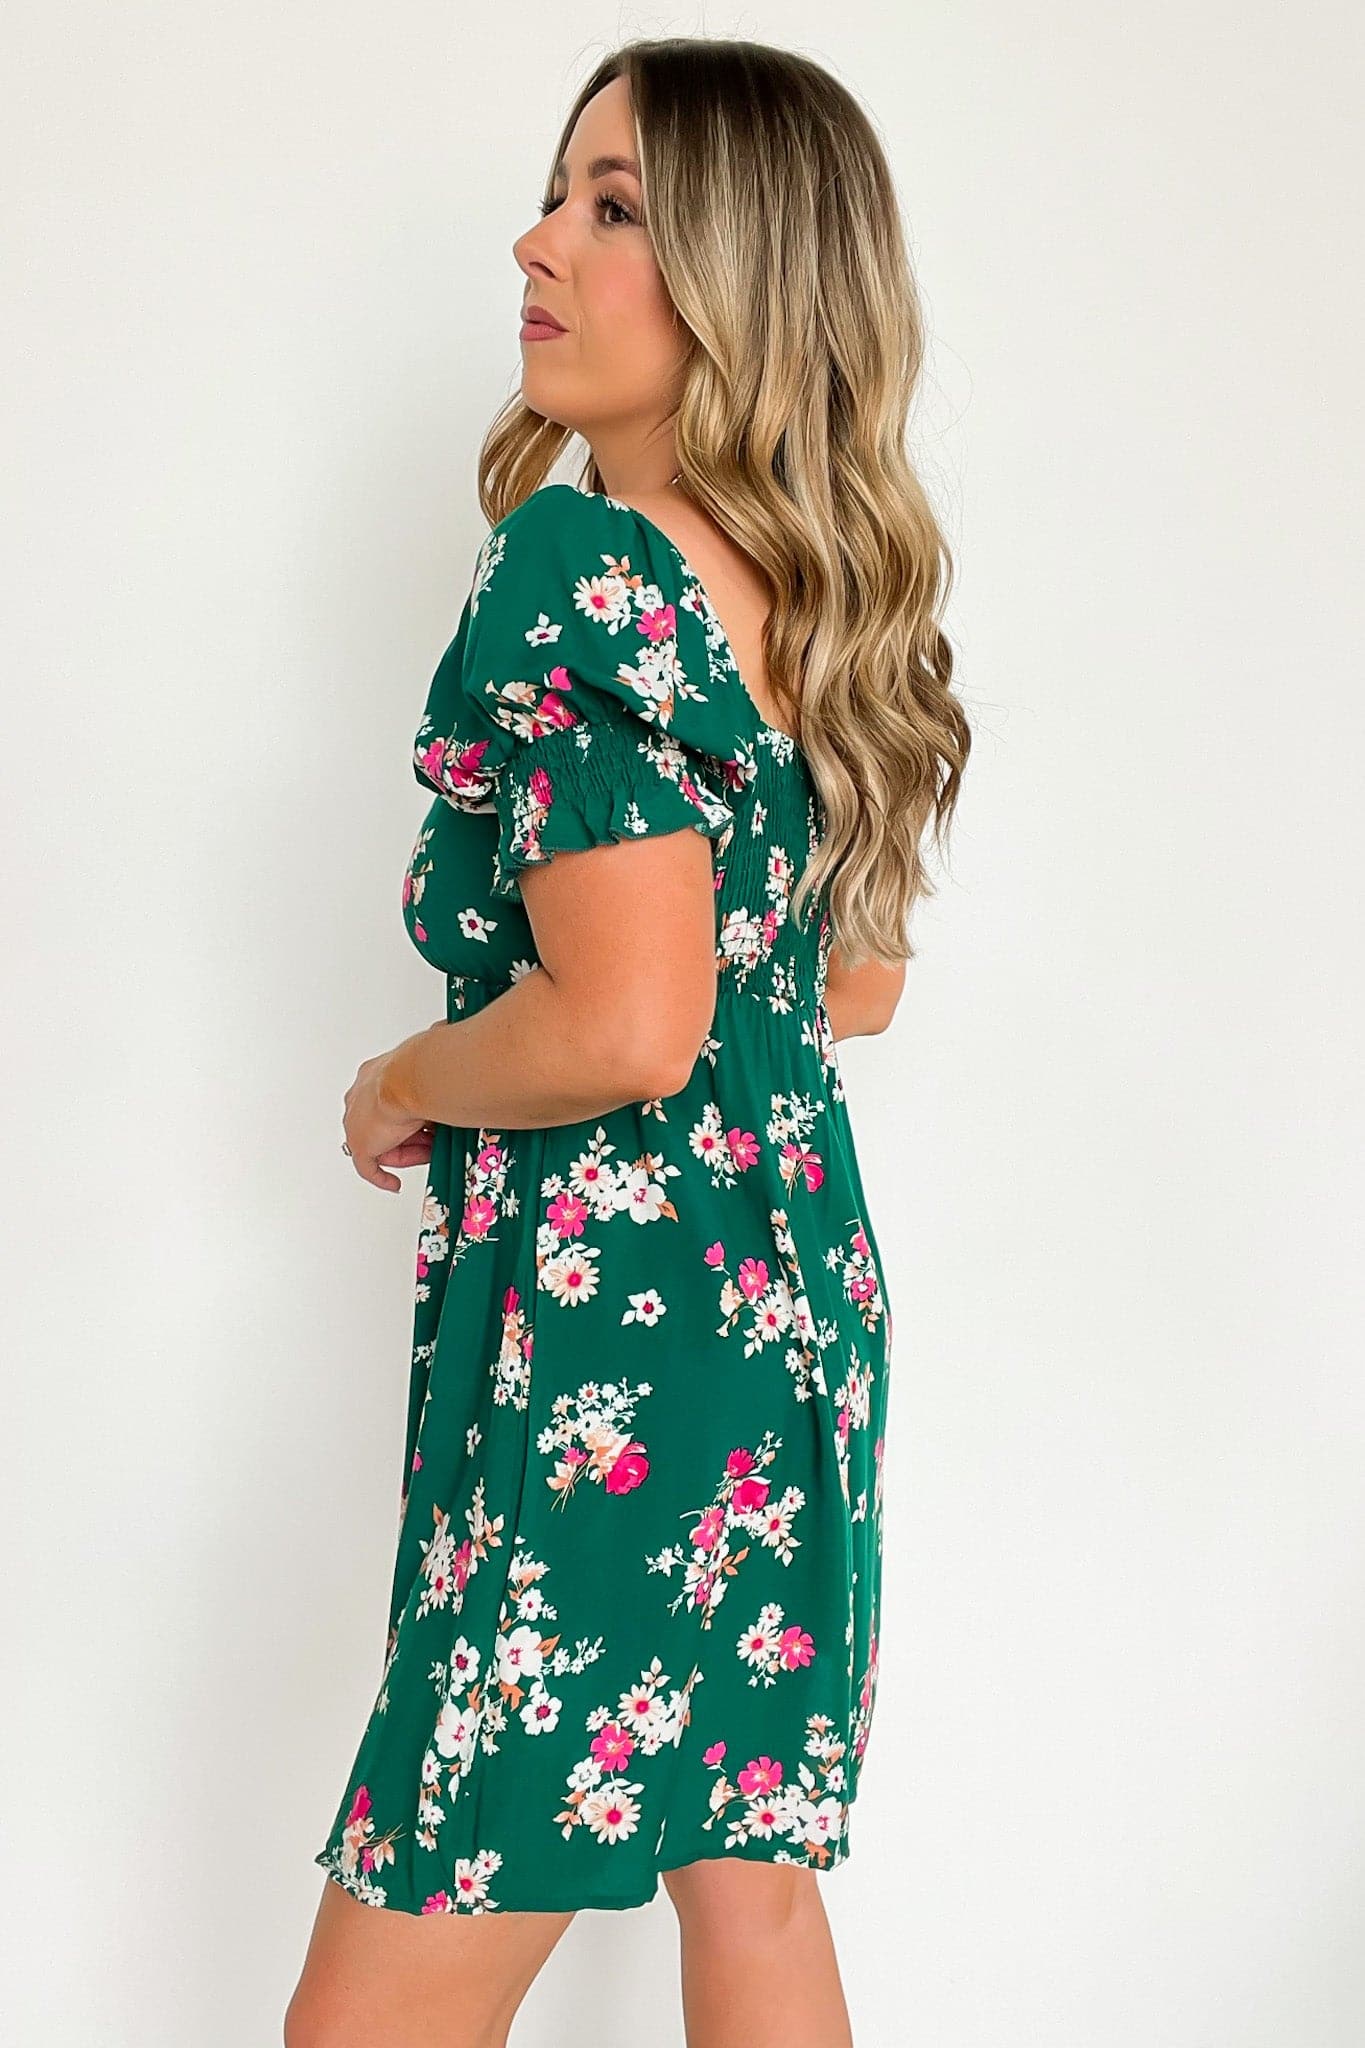  Like a Song Smocked Floral Tunic Dress - FINAL SALE - Madison and Mallory